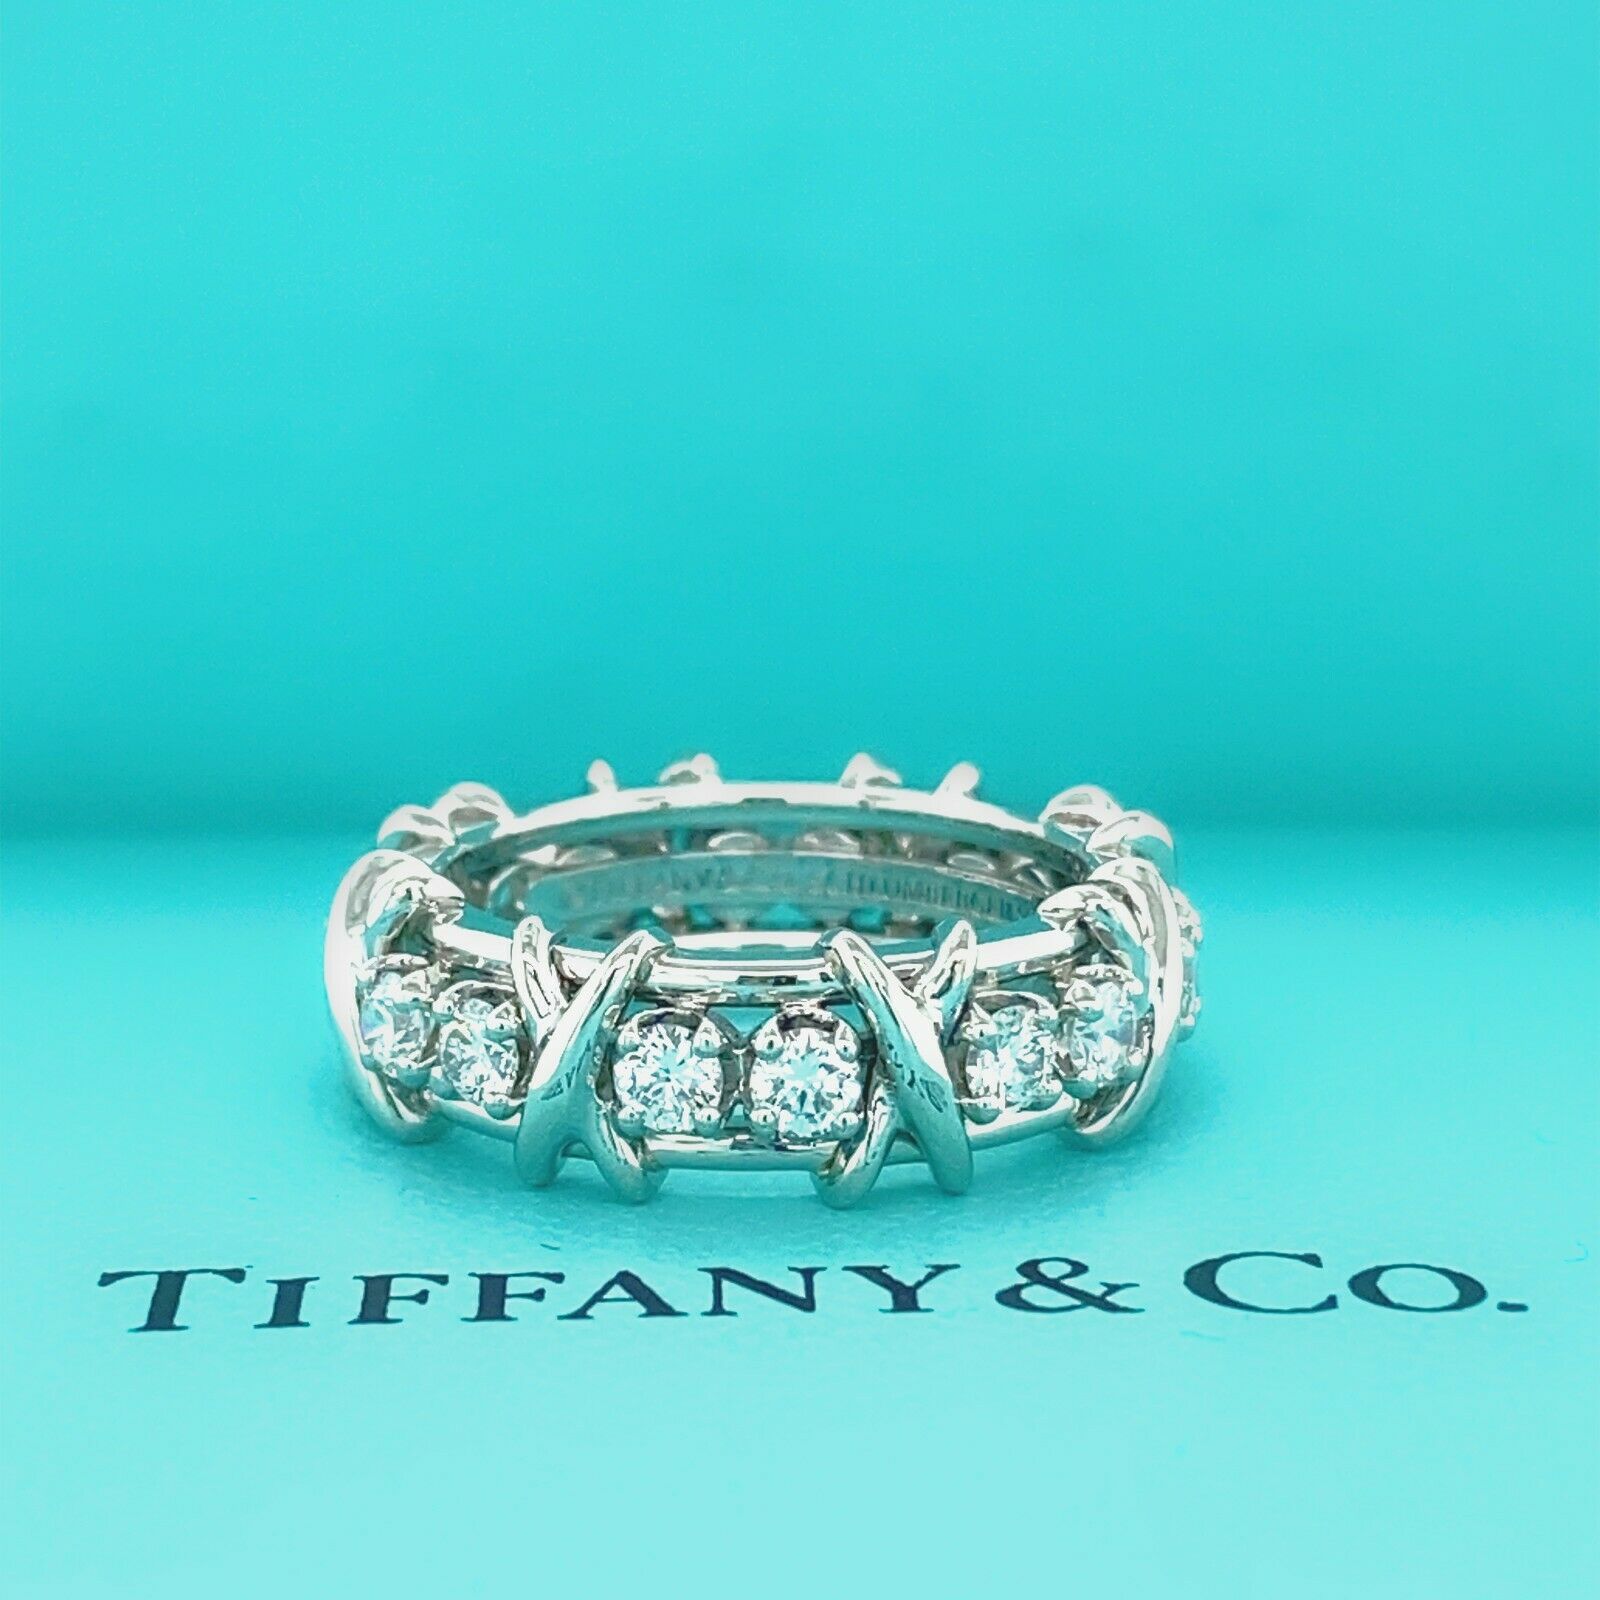 Tiffany & Co. Schlumberger® Sixteen Stone rings with diamonds, from left:  18k gold, 18k gold with sap… | Tiffany and co jewelry, Rare jewelry,  Tiffany wedding rings